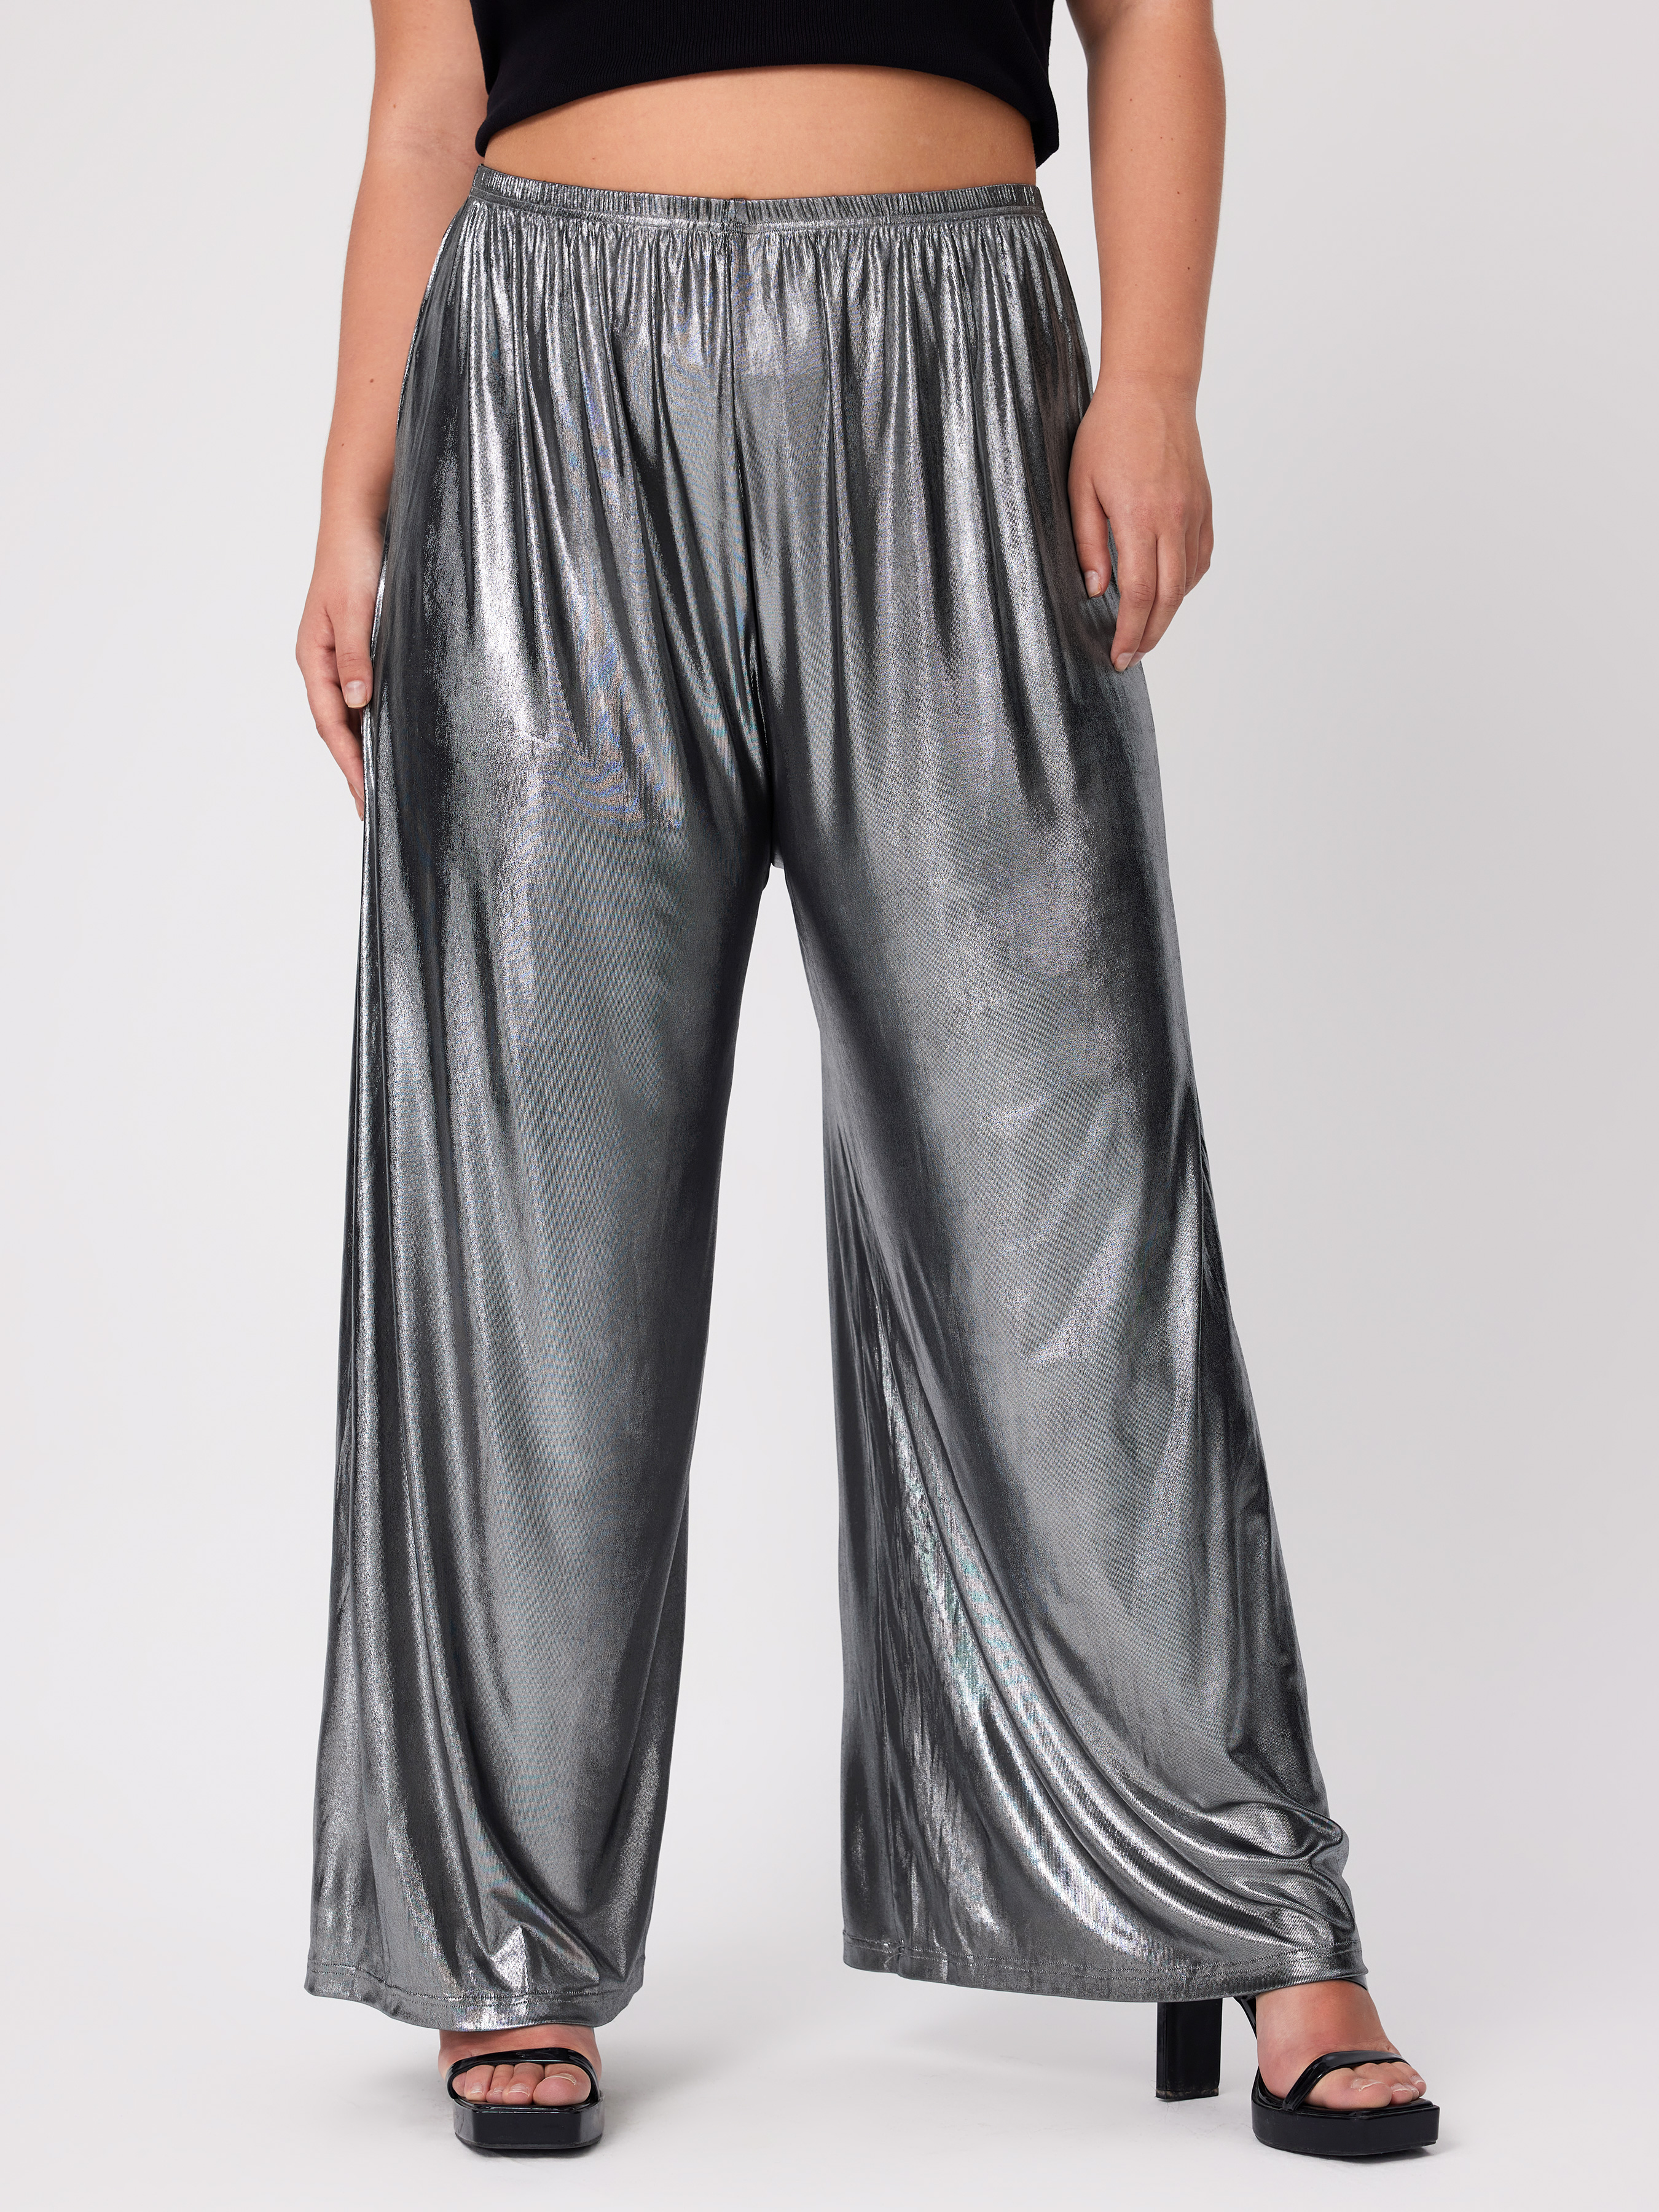 Tcremisa Women's Metallic Shiny Pants Elastic Waist Ruched Joggers Solid  Casual Drawstring Trousers at Amazon Women's Clothing store